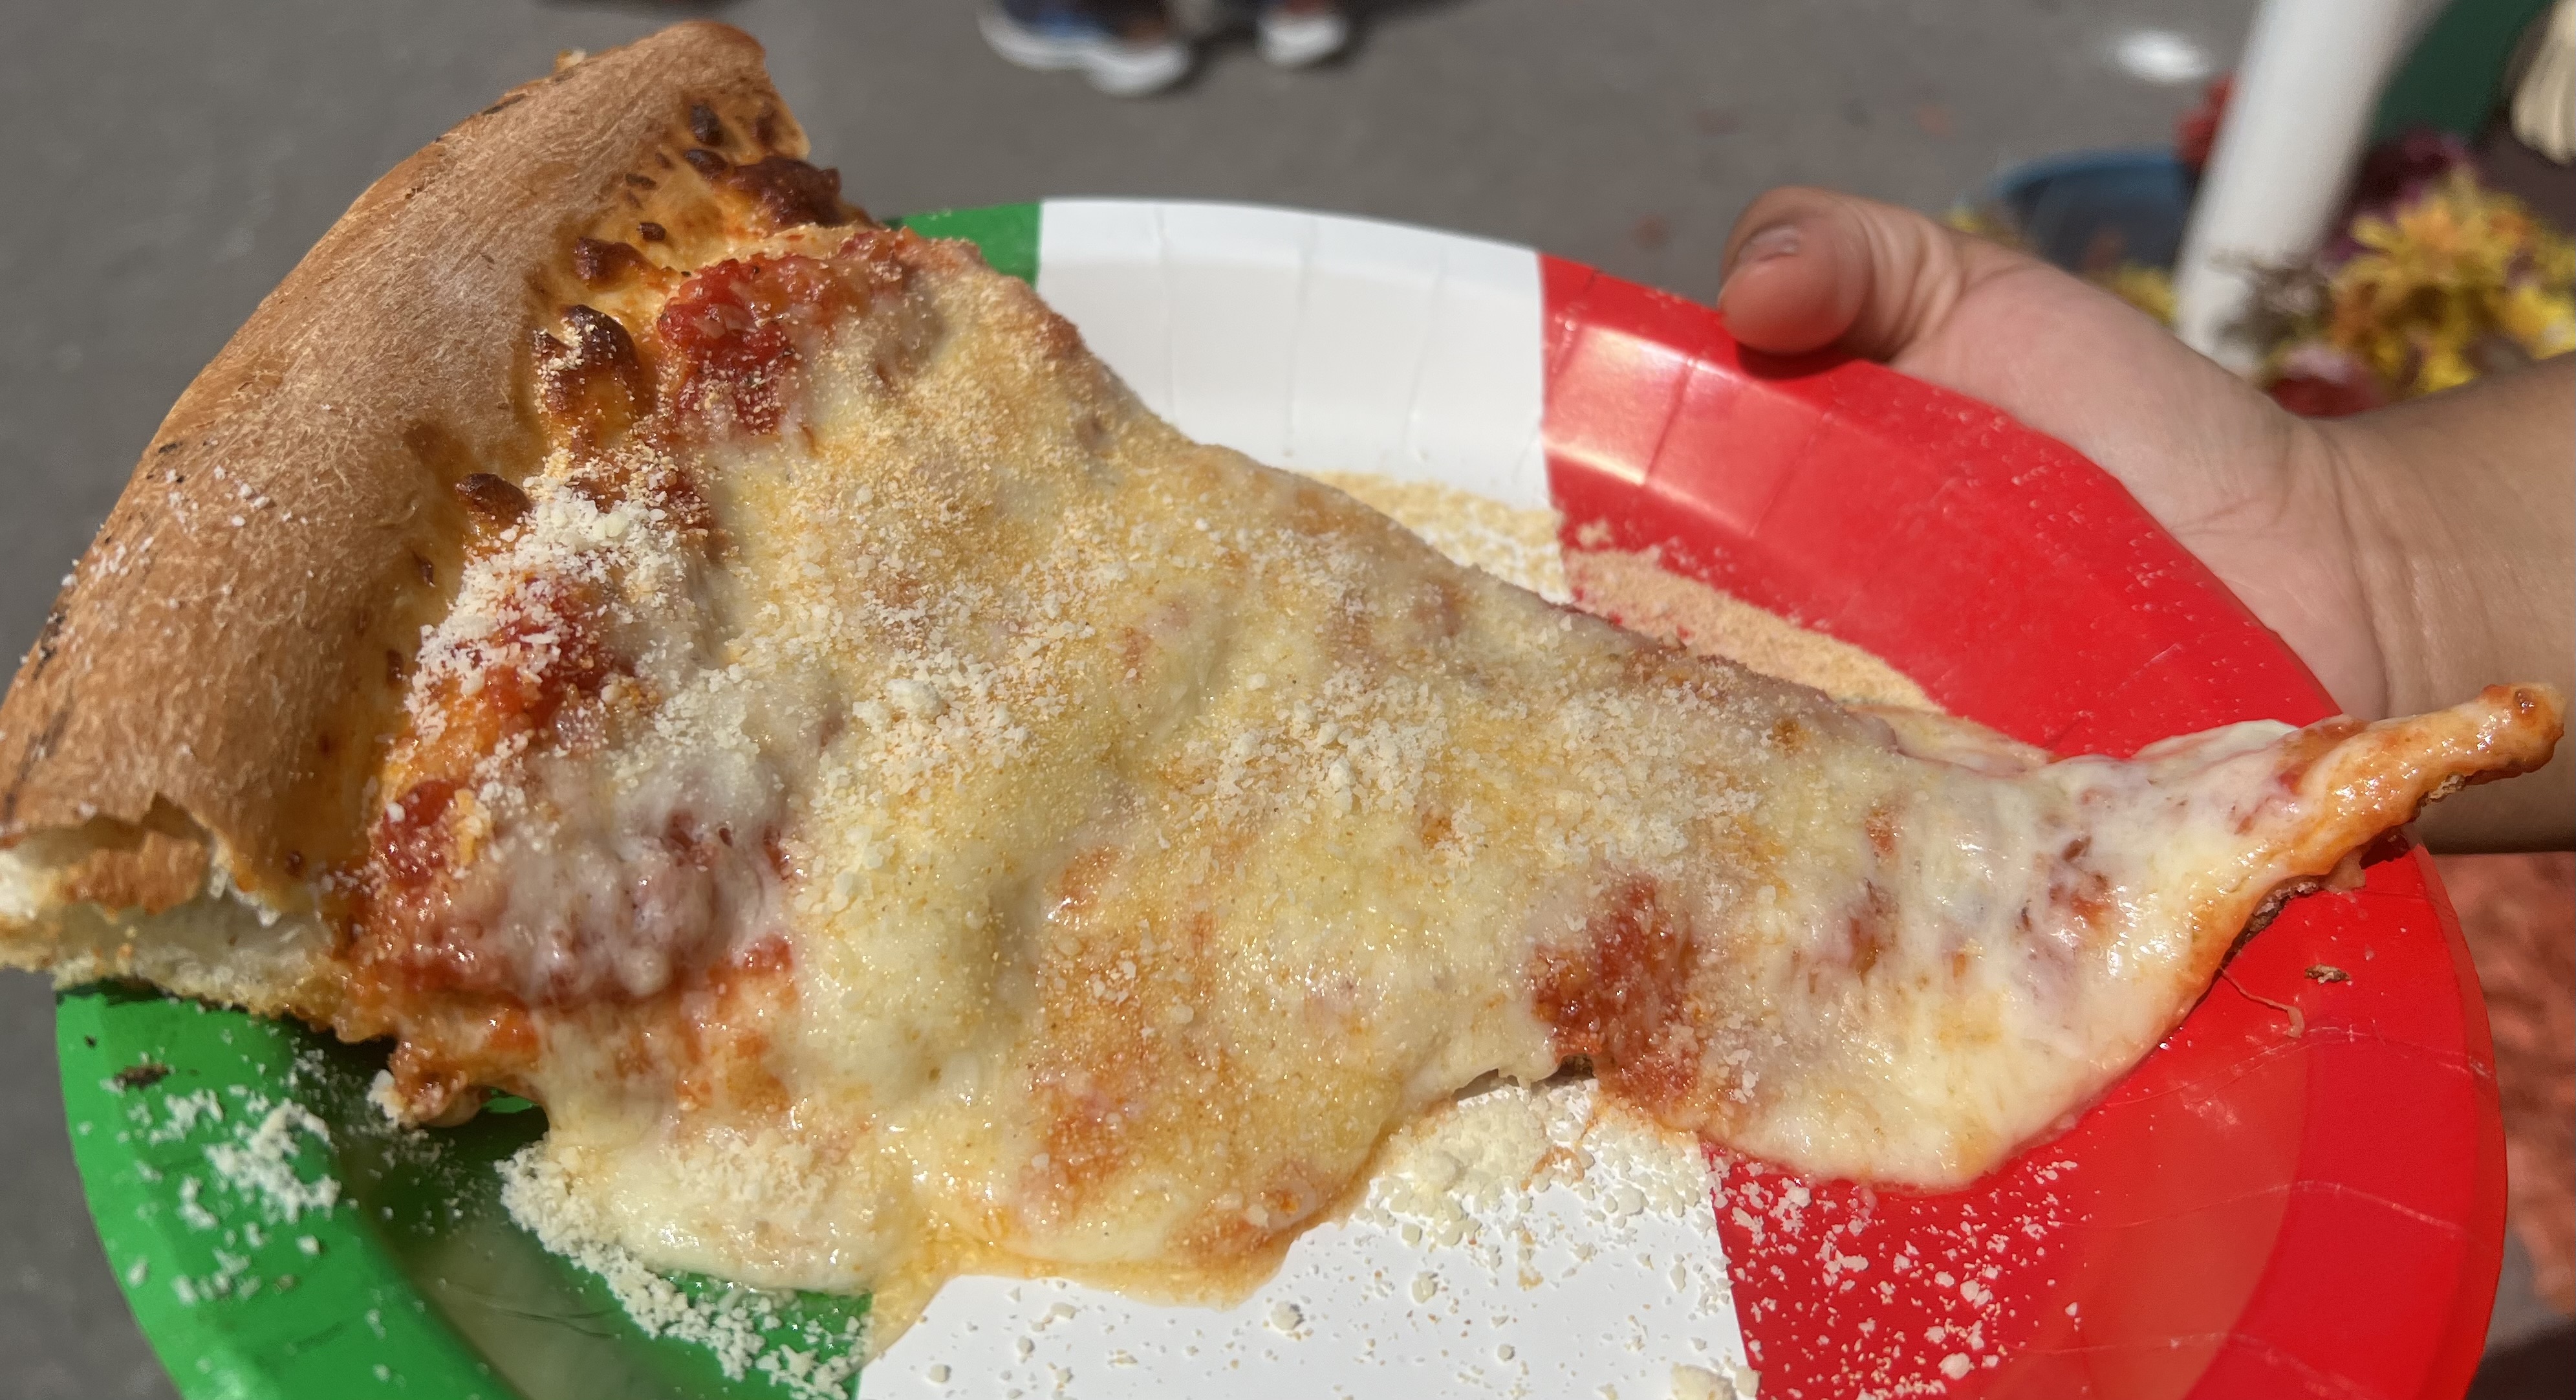 New York Specialties on Restaurant Row at the New York State Fair offers a hot and ready and cheesy slice of pizza.